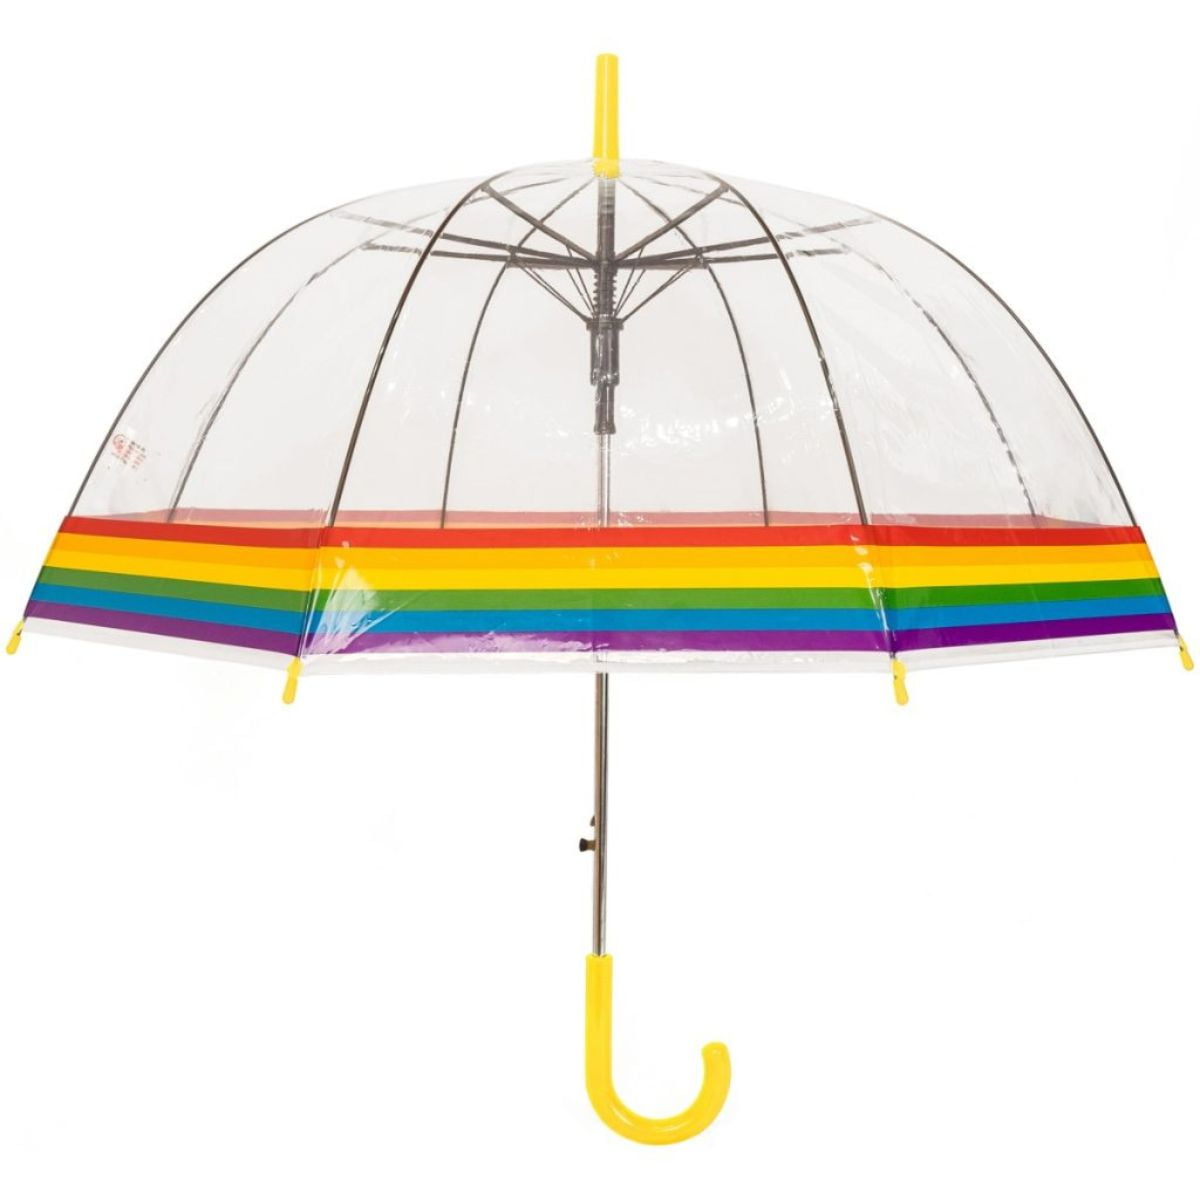 Rainbow Clear Dome Umbrella - yellow handle - side view